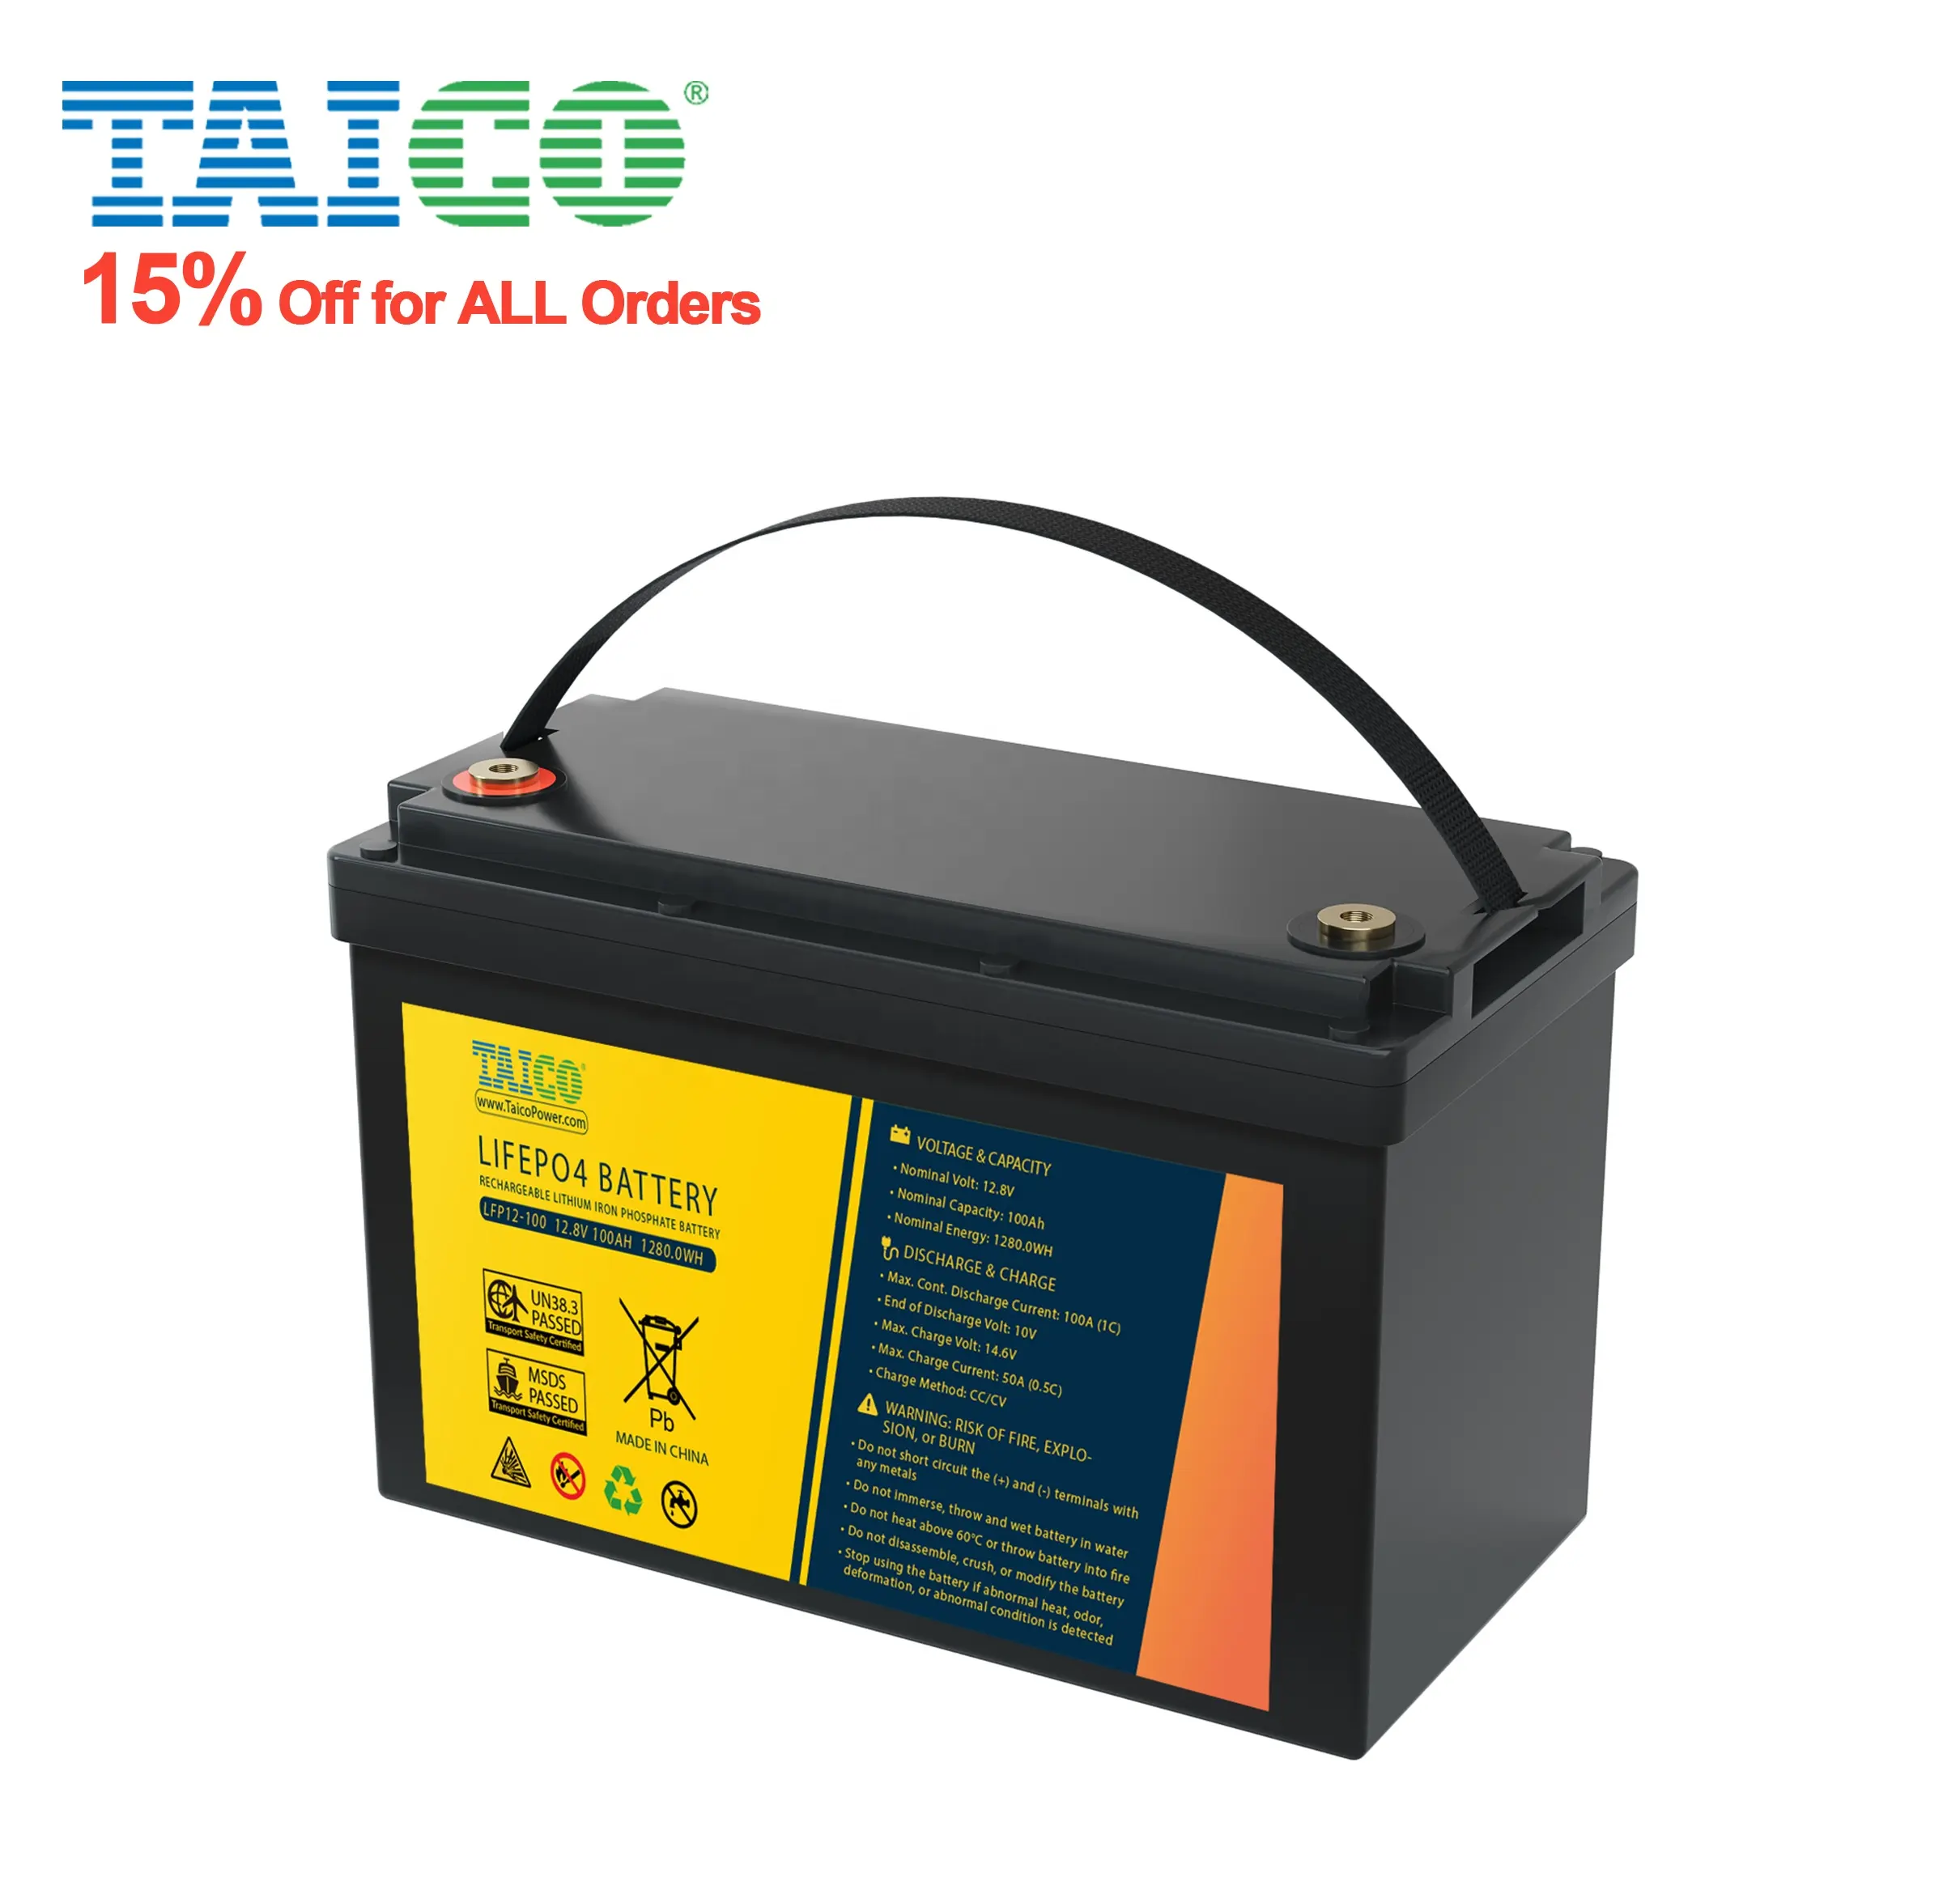 TAICO Super Safety 12V Lifepo4 Battery 12.8v 100AH Low Temperature Lithium Batteries Manufacturers